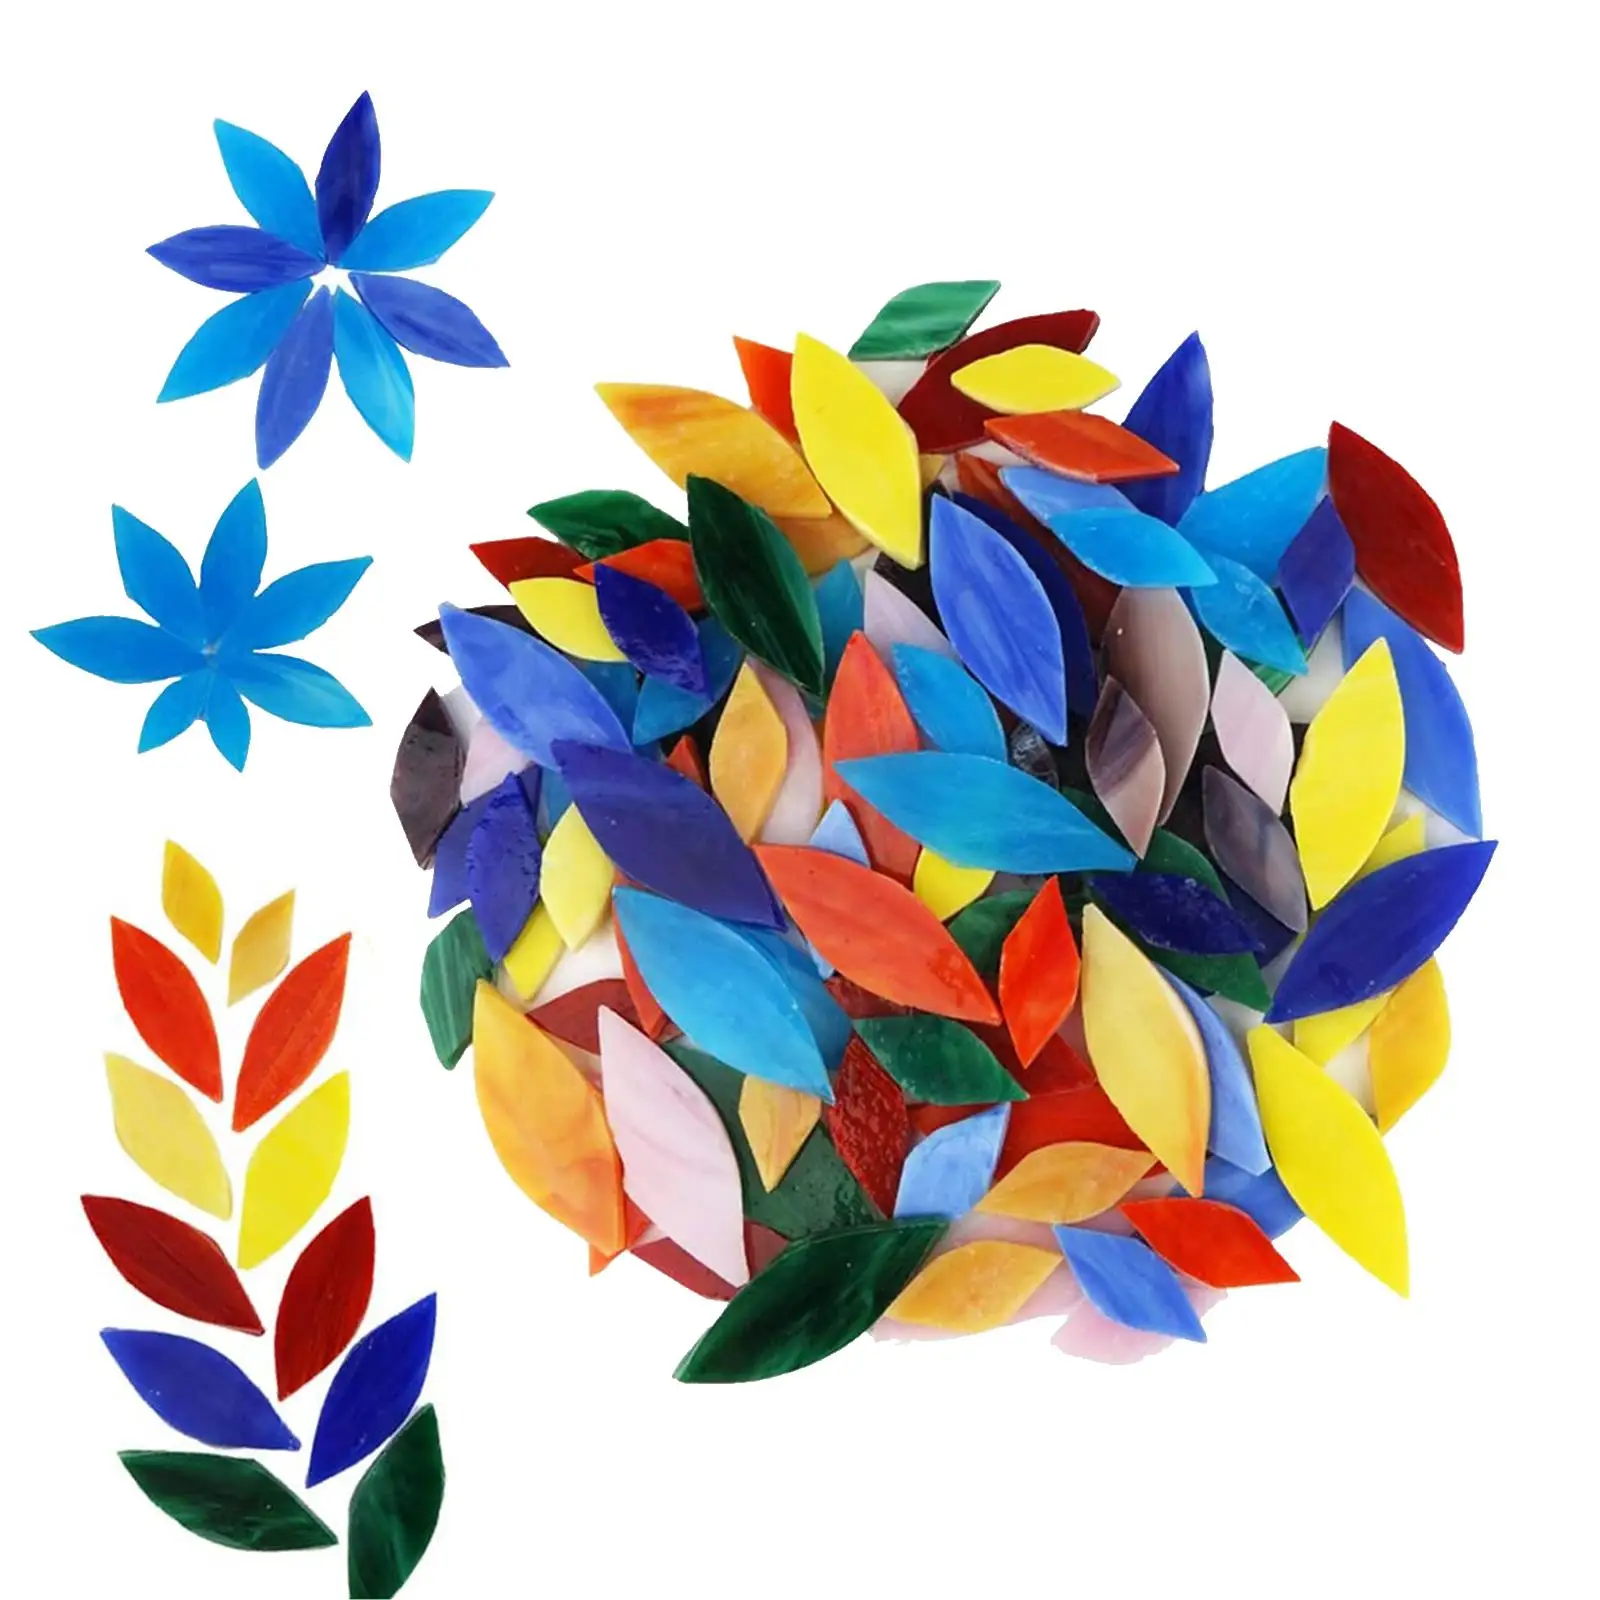 100 Pieces Mosaic Tiles Flower Leaves Hand-Cut Stained Glass Home Decoration